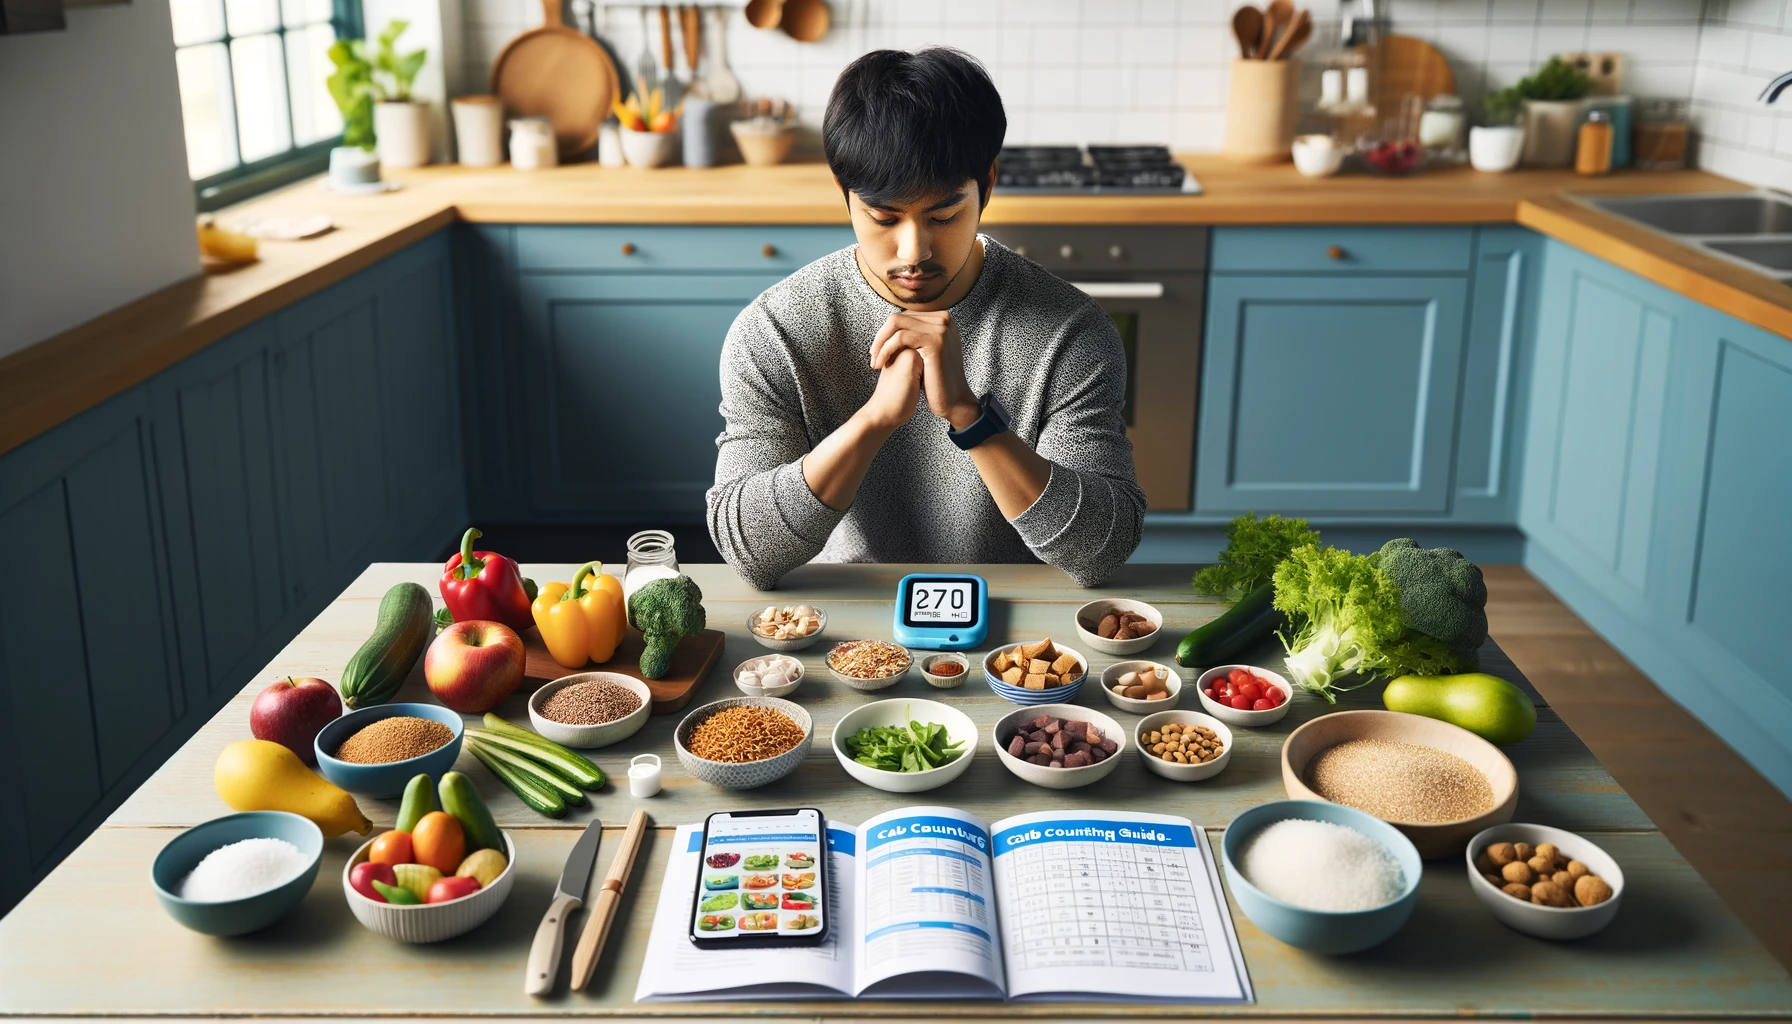 A South Asian person calculating carbs and controlling portion sizes with healthy foods, a carb counting guide, and a diabetes management app in a well-equipped kitchen.